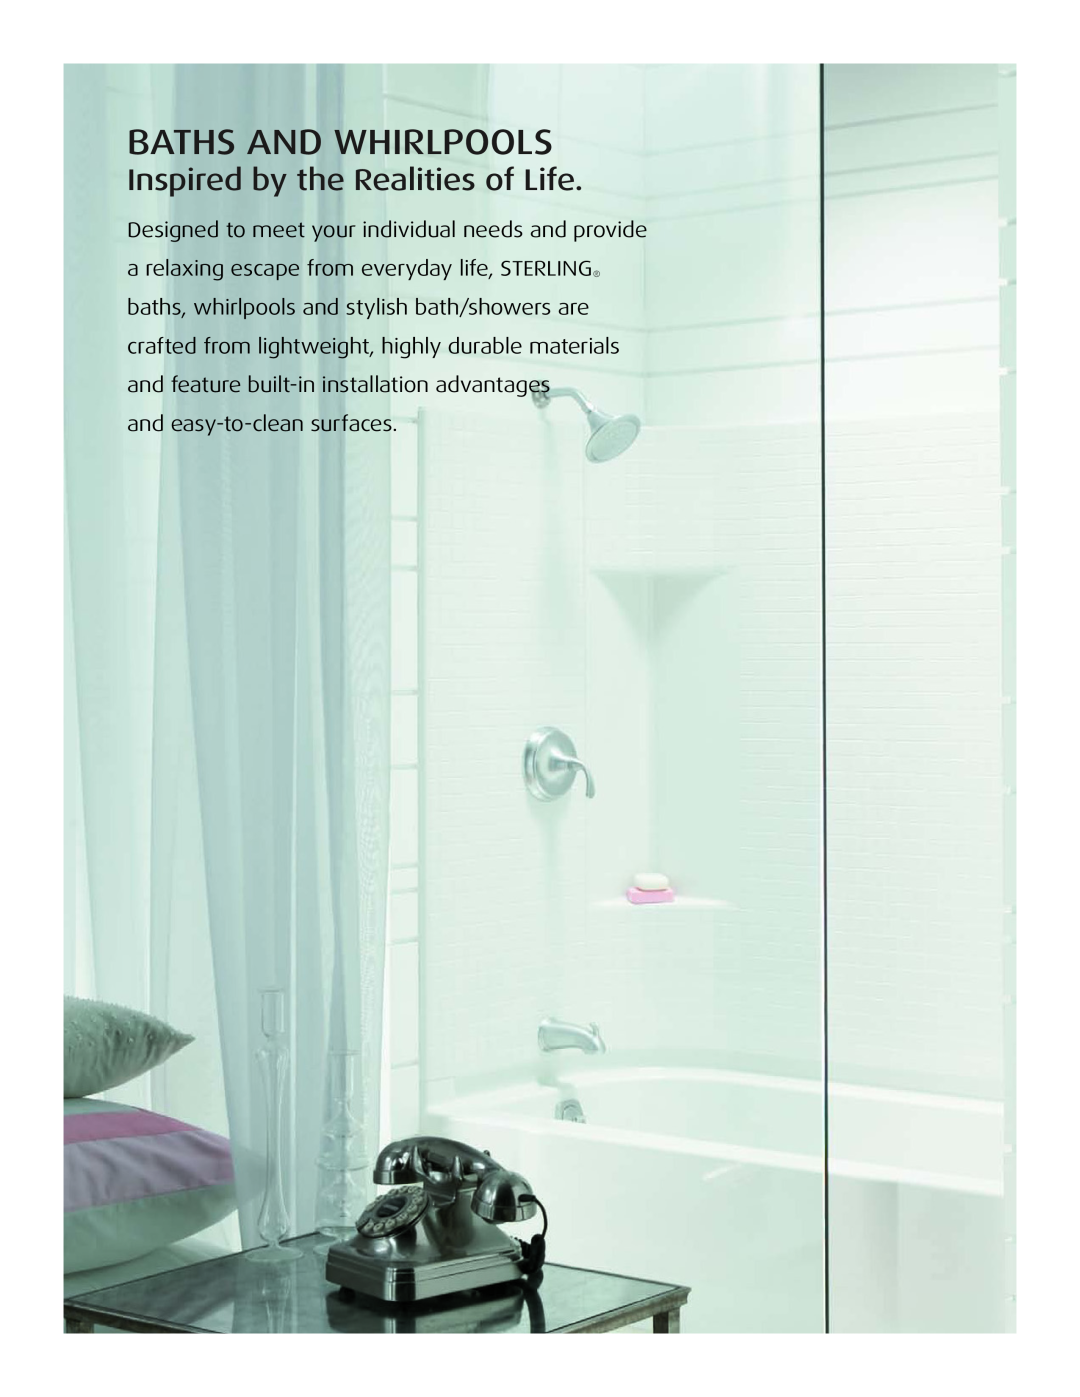 Sterling Plumbing Bathtub Showers manual Baths And Whirlpools, Inspired by the Realities of Life, and easy-to-cleansurfaces 